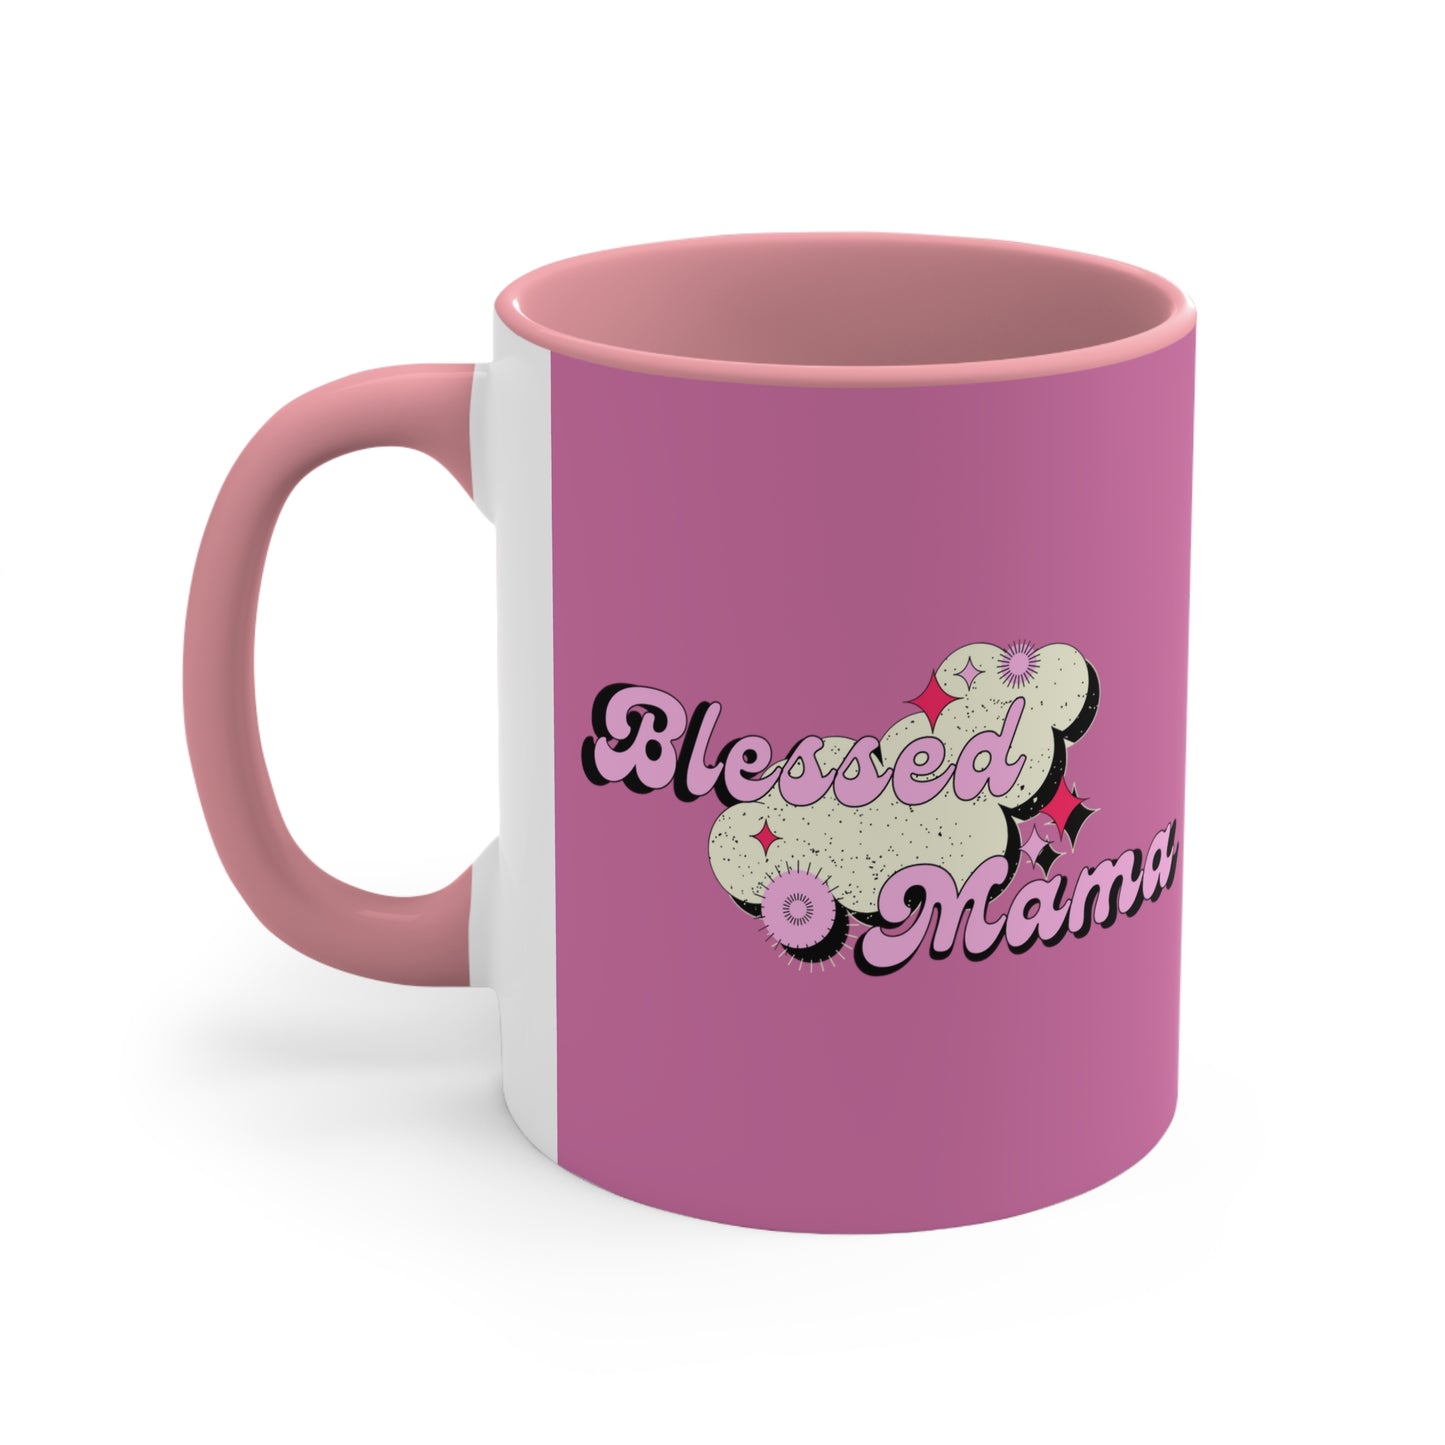 Blessed Mama - Mothers Day Accent Coffee Mug, 11oz